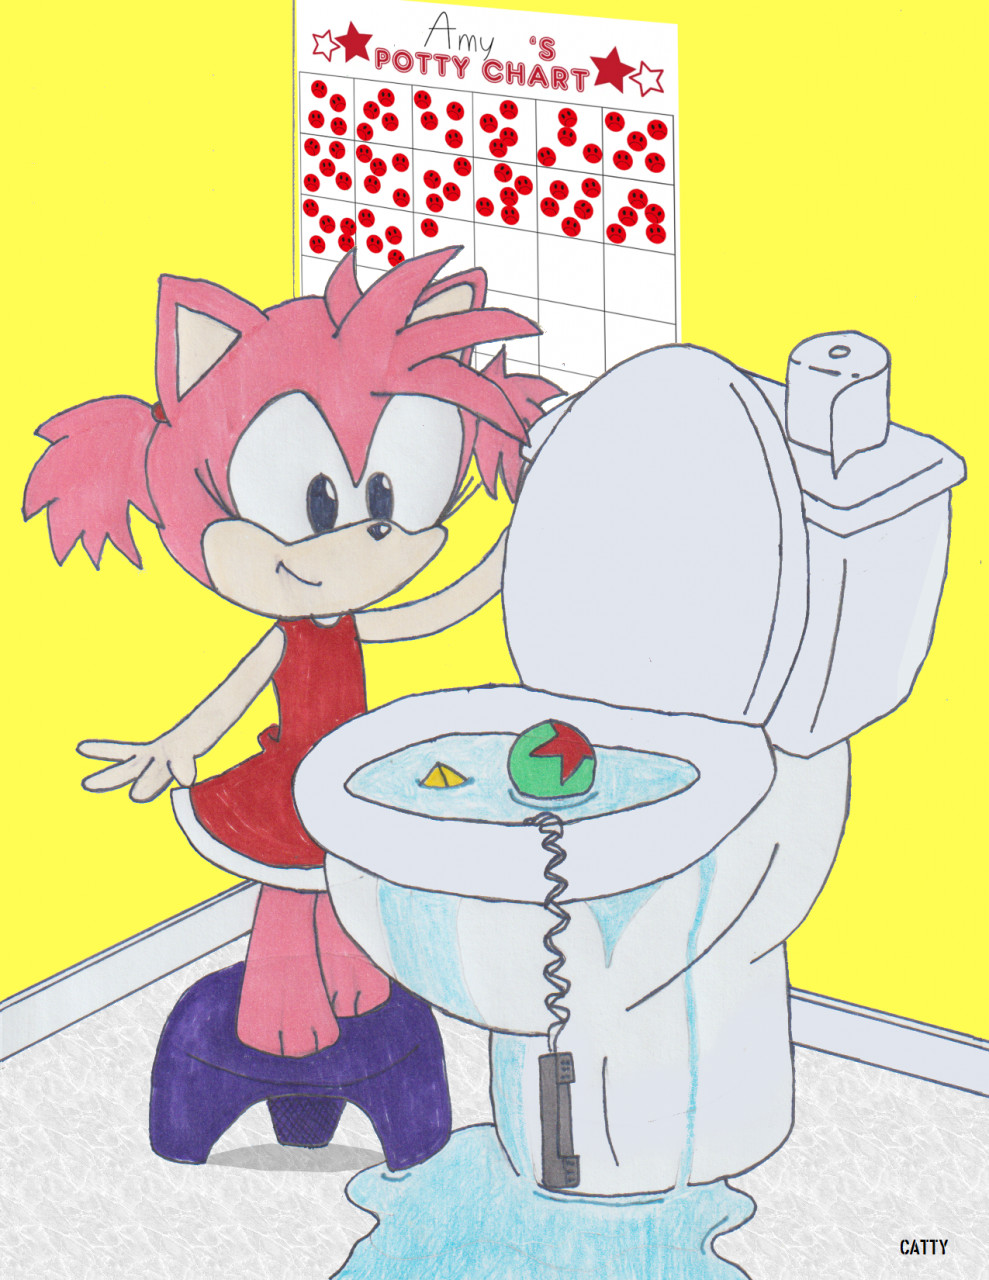 Amy rose on the toilet